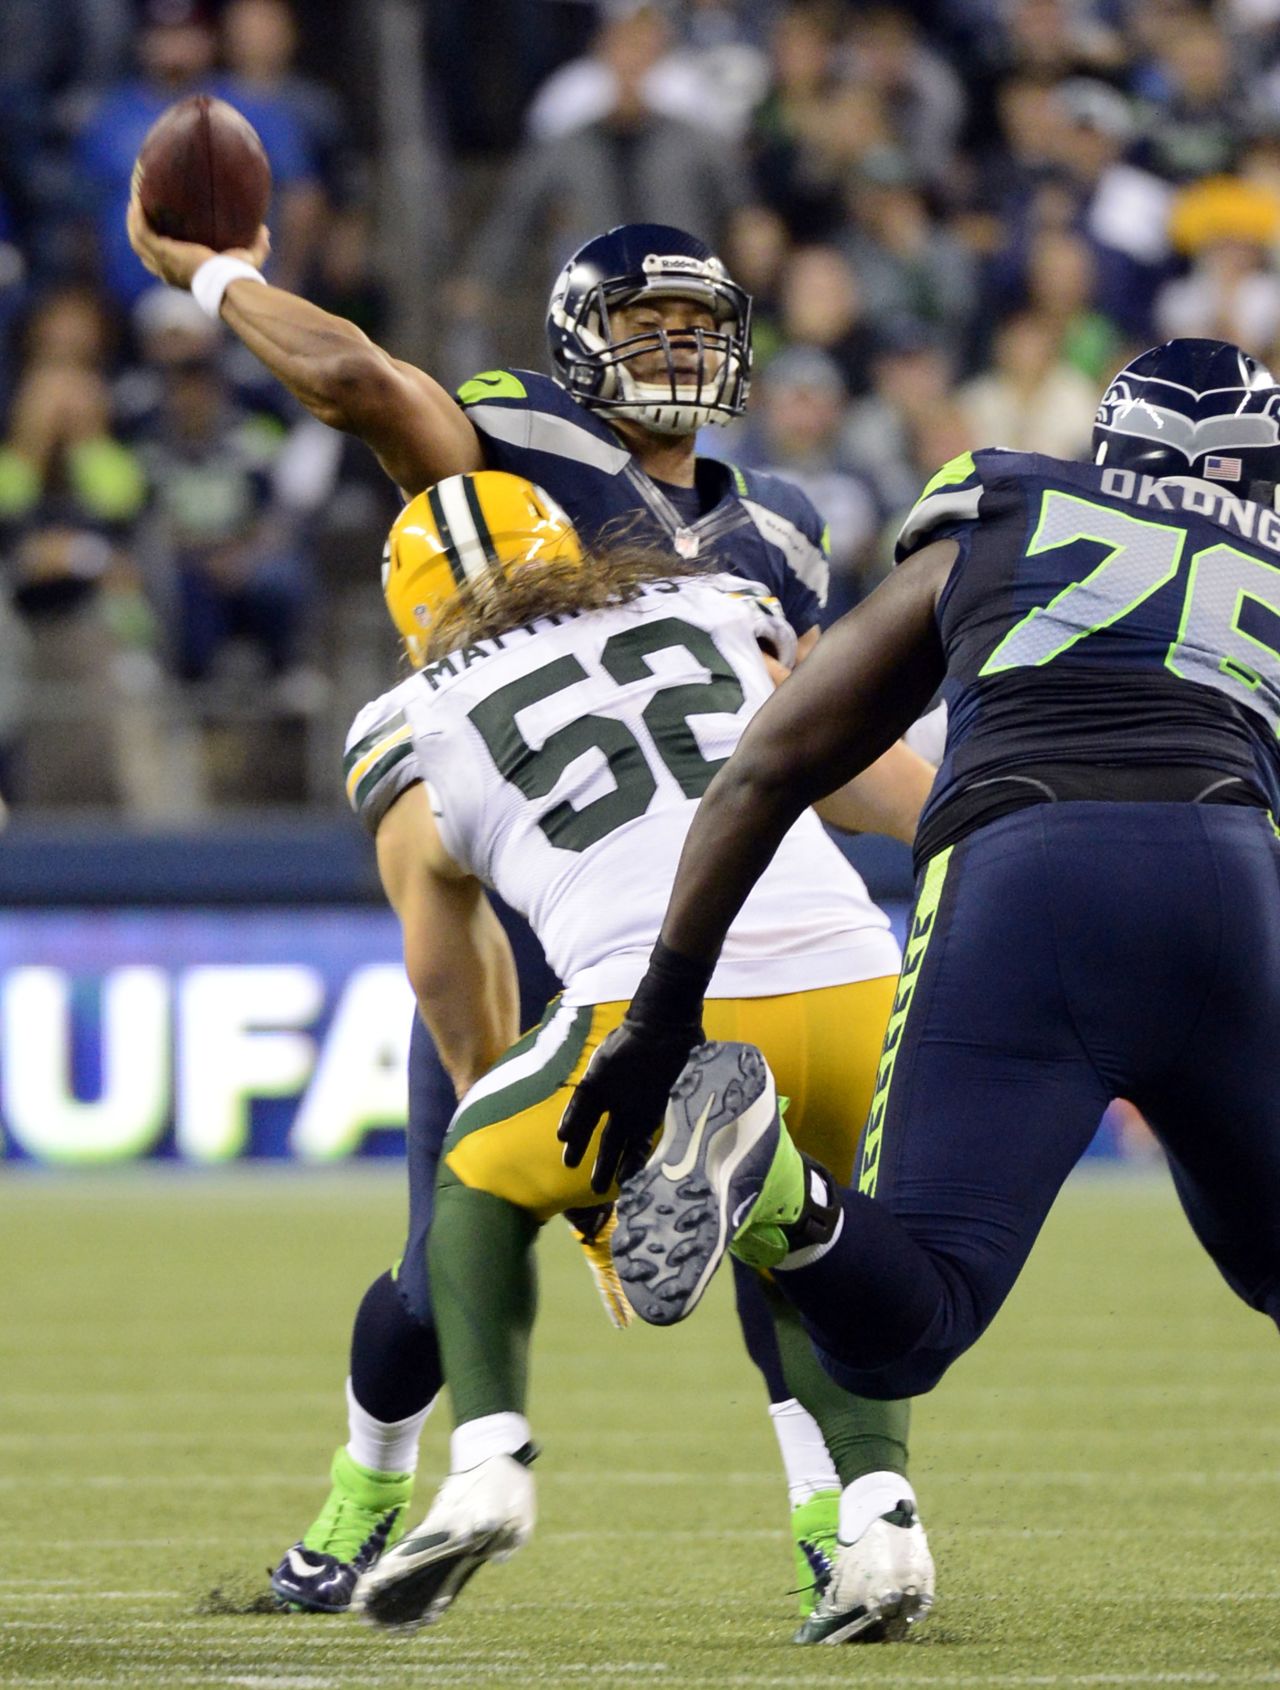 Seattle Seahawks quarterback Russell Wilson throws the winning touchdown pass against the Green Bay Packers in Seattle on Monday night. The Seahawks defeated the Packers 14-12 after a much-questioned call by the referees. 